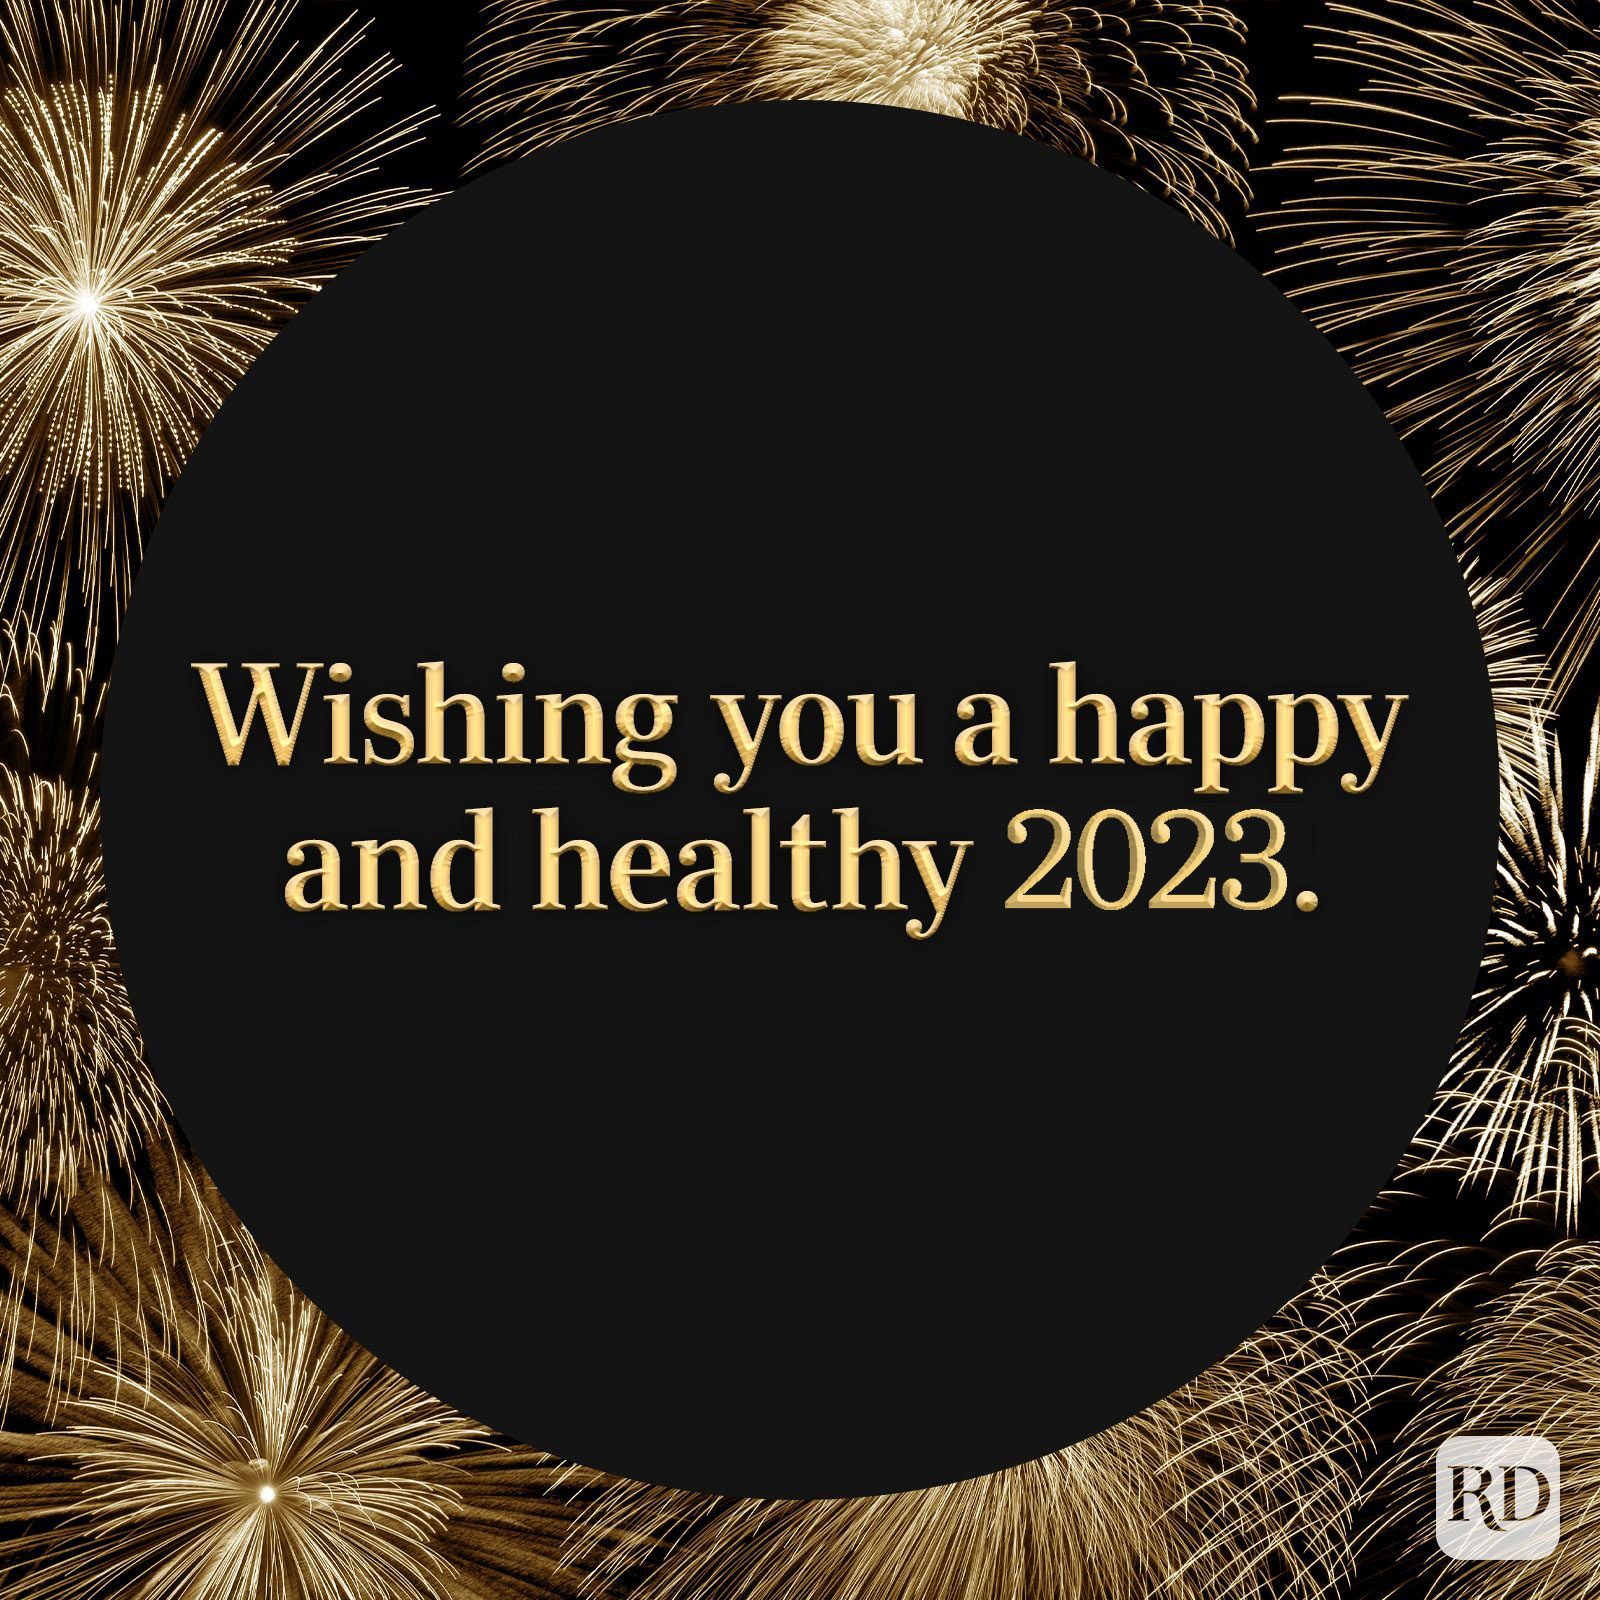 Happy New Year 2023: Wishes, Quotes, Messages, Images, Photos